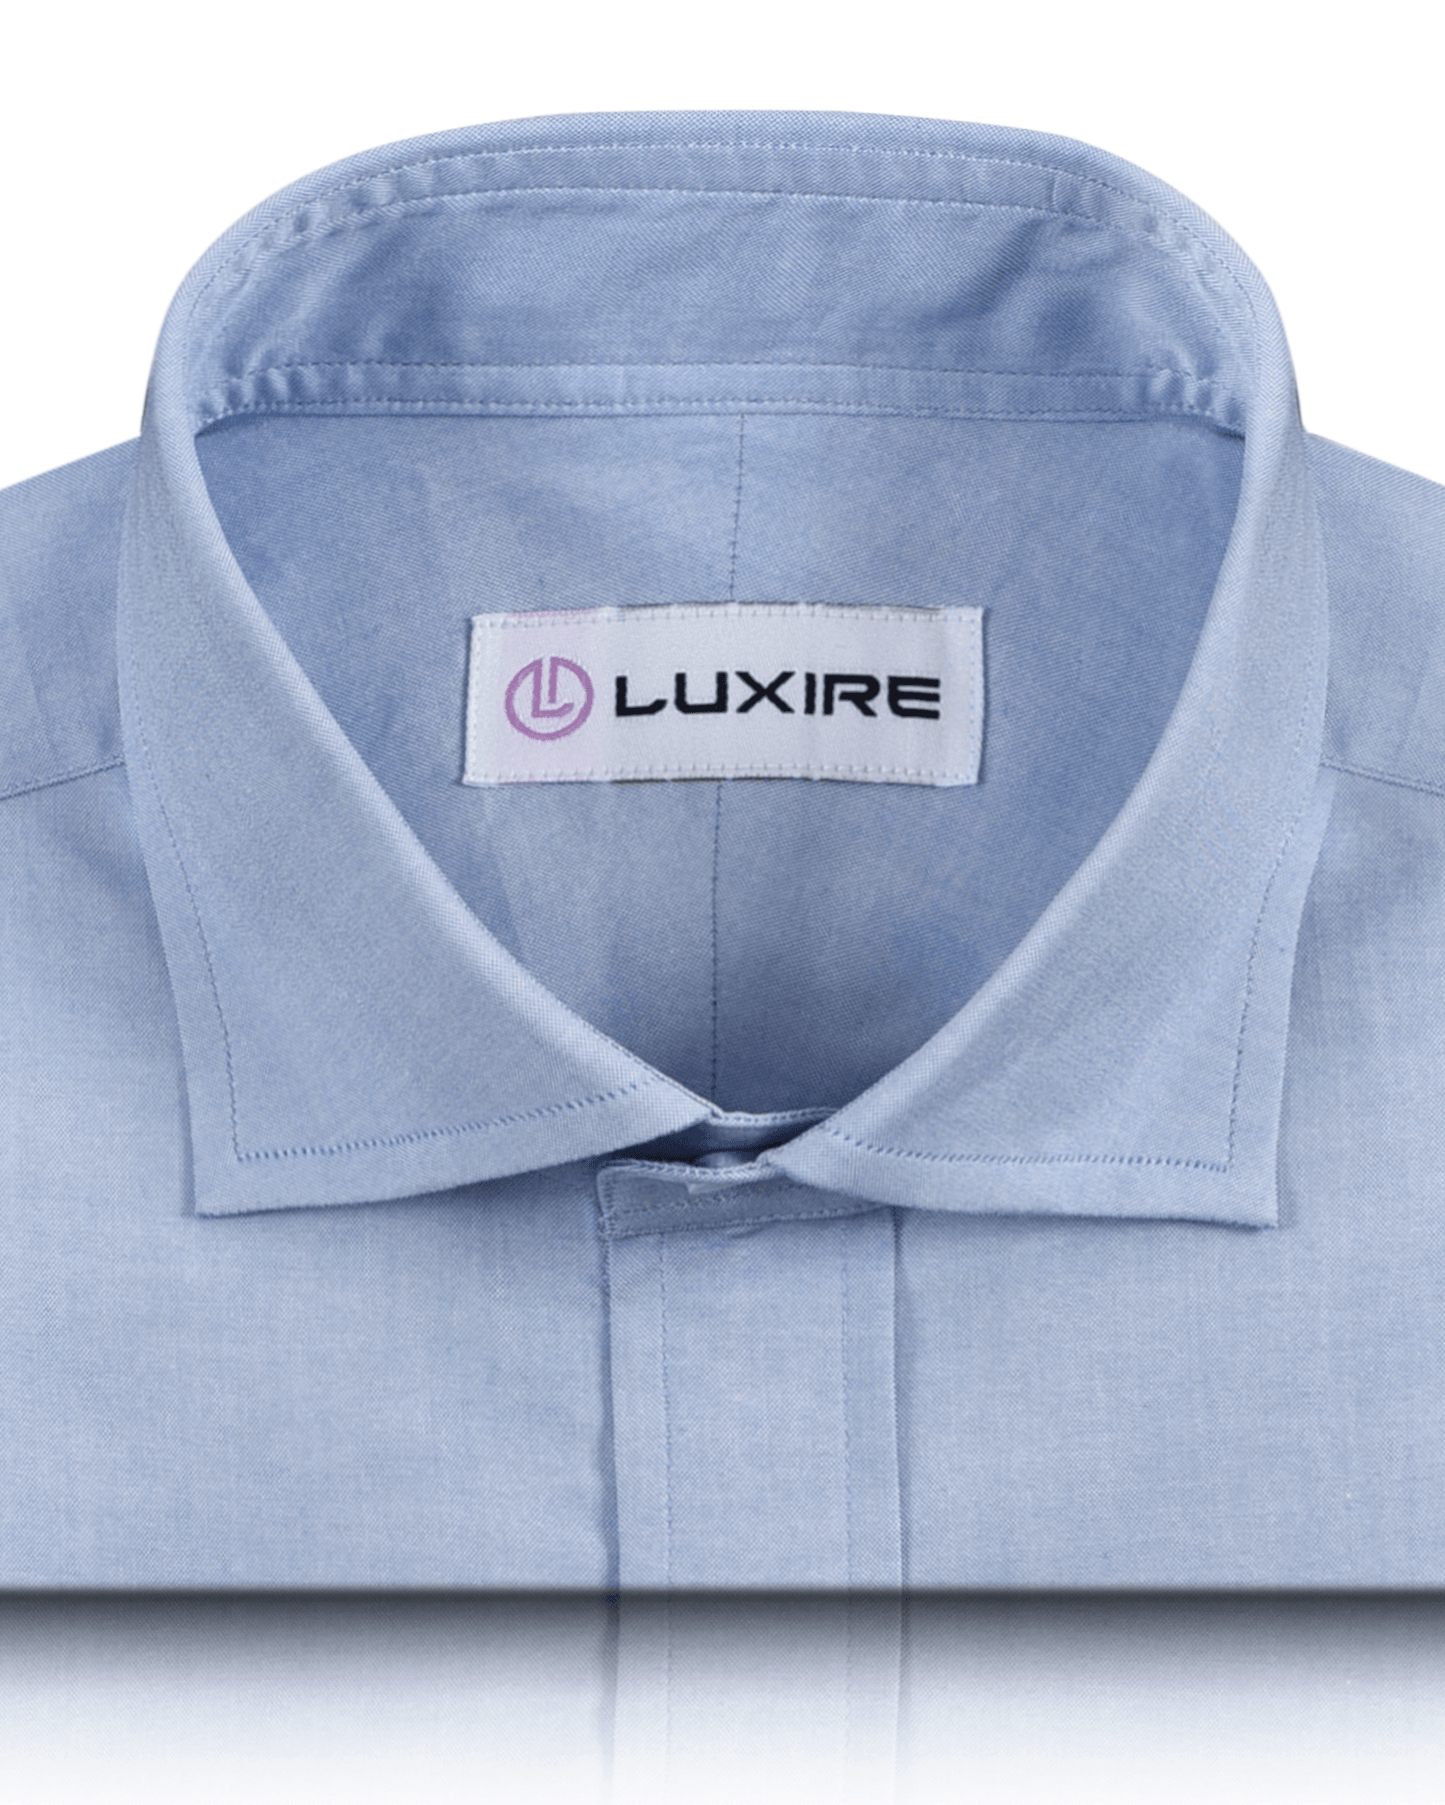 Collar of the custom oxford shirt for men by Luxire in sky blue pinpoint